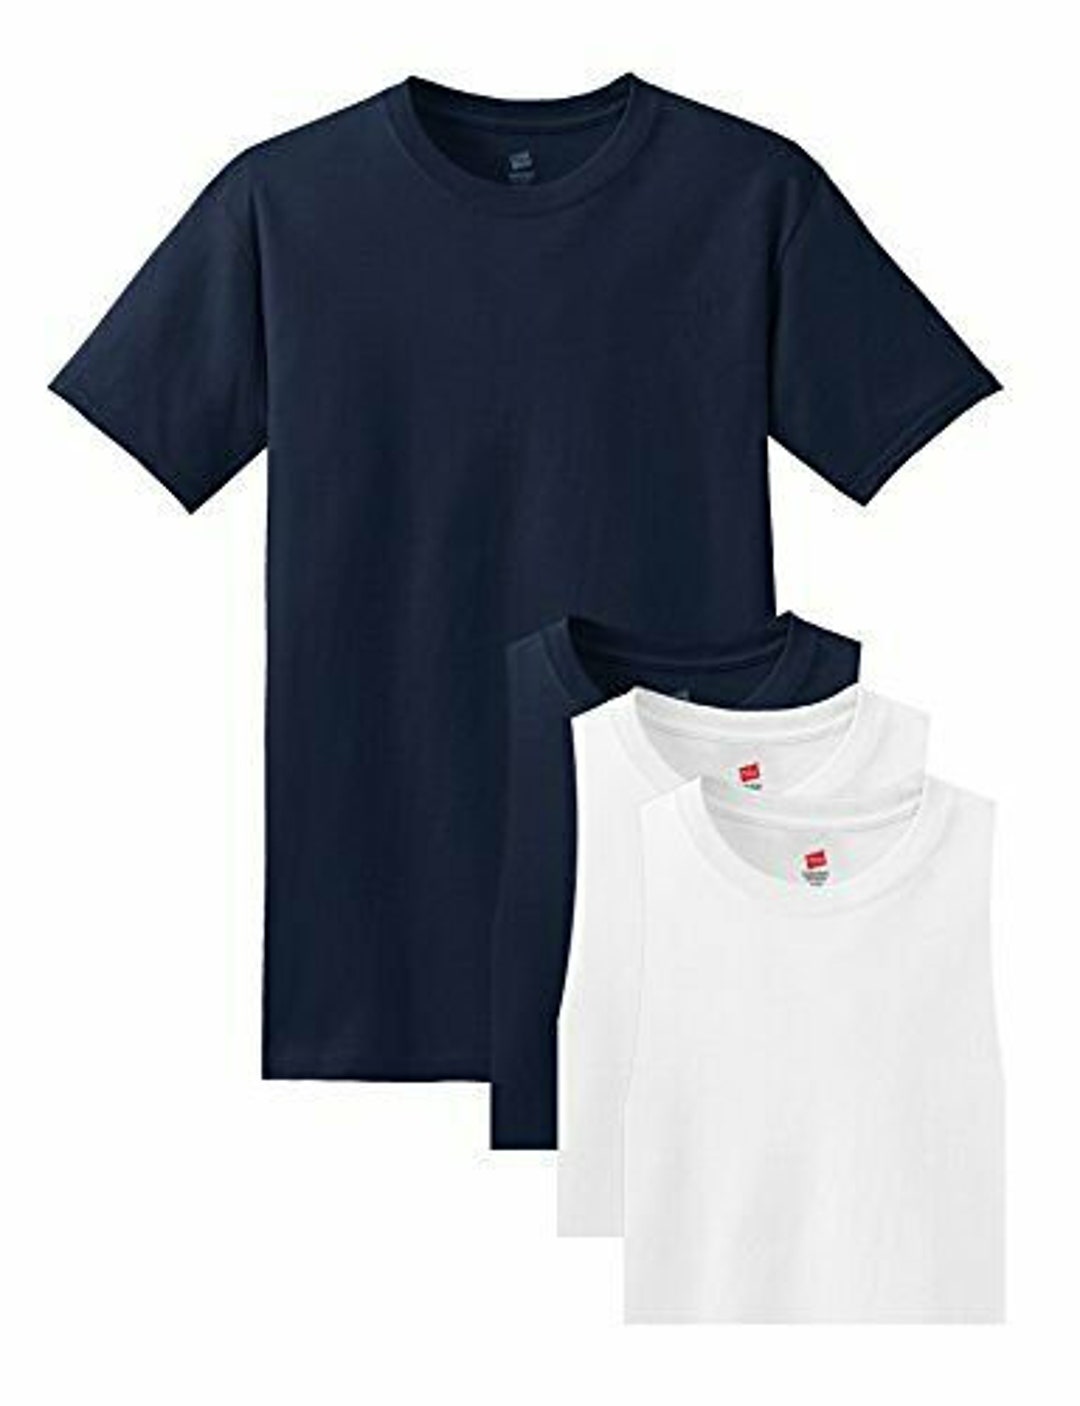 Special Offer Every Day By Day Hanes Mens Comfortsoft 4 Pack Freshiq